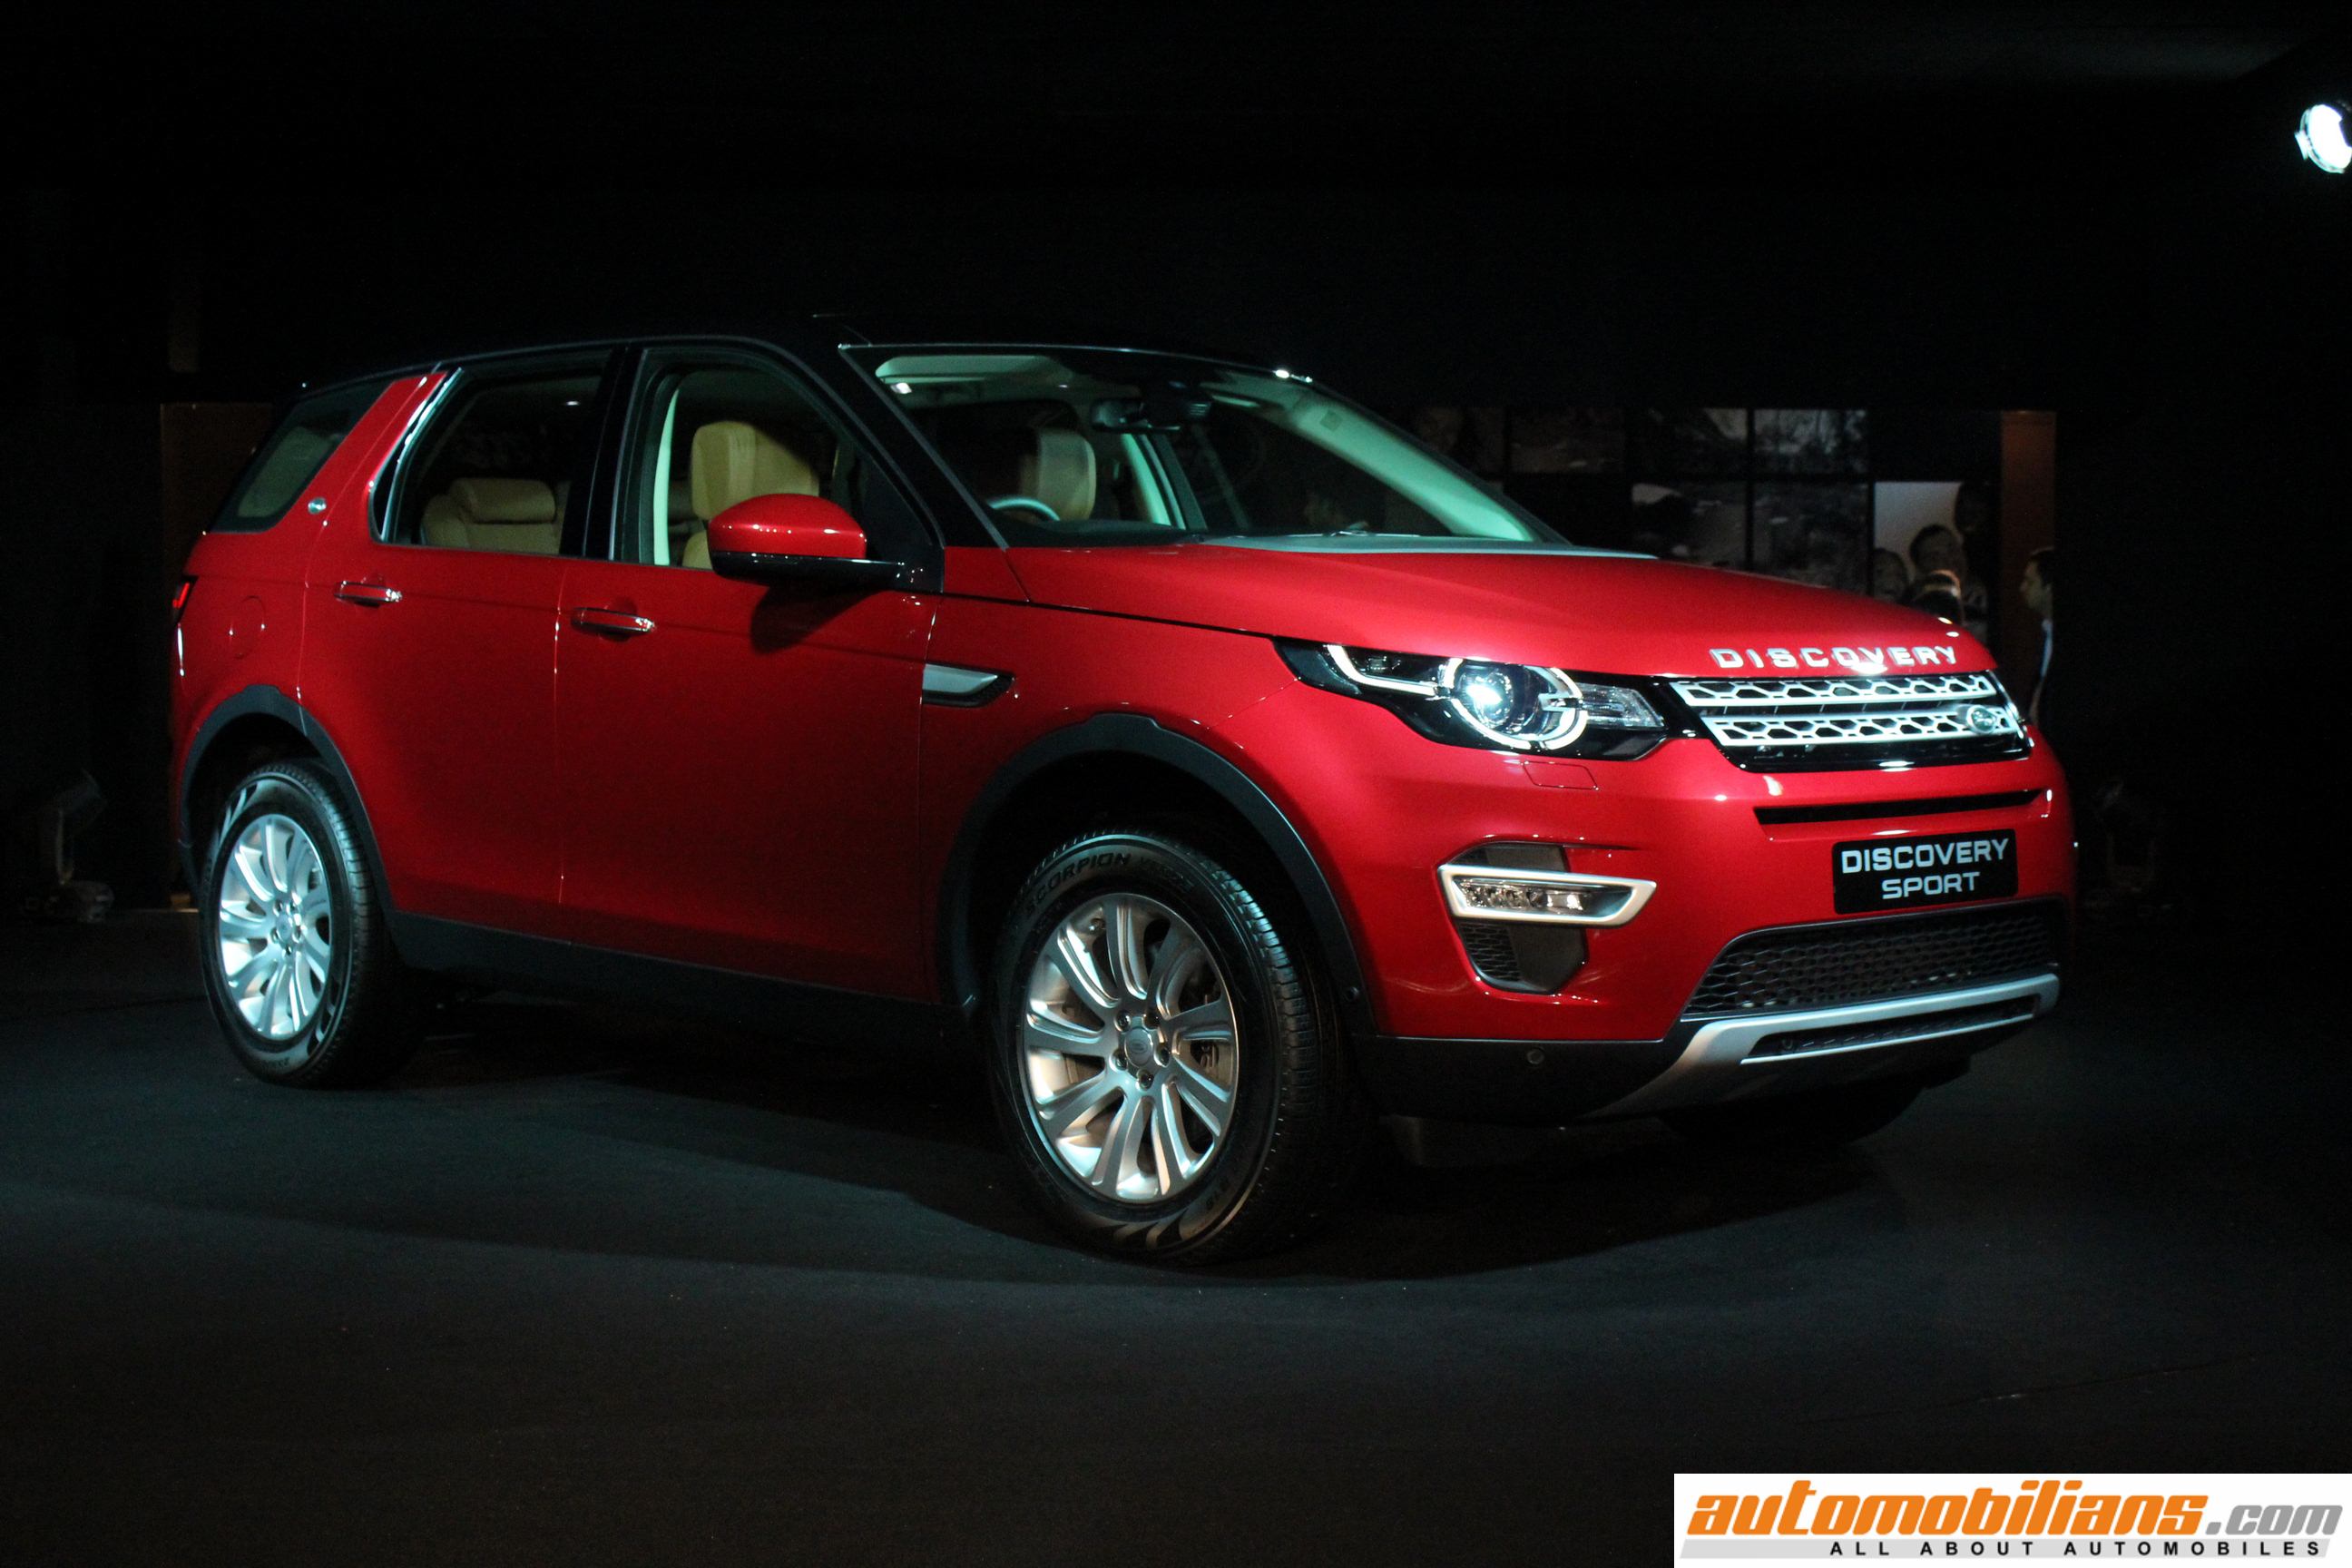 Land Rover Discovery Sport Launched In India At Rs. 46.10 Lakhs (Ex-Showroom, Pre-Octroi In Mumbai)